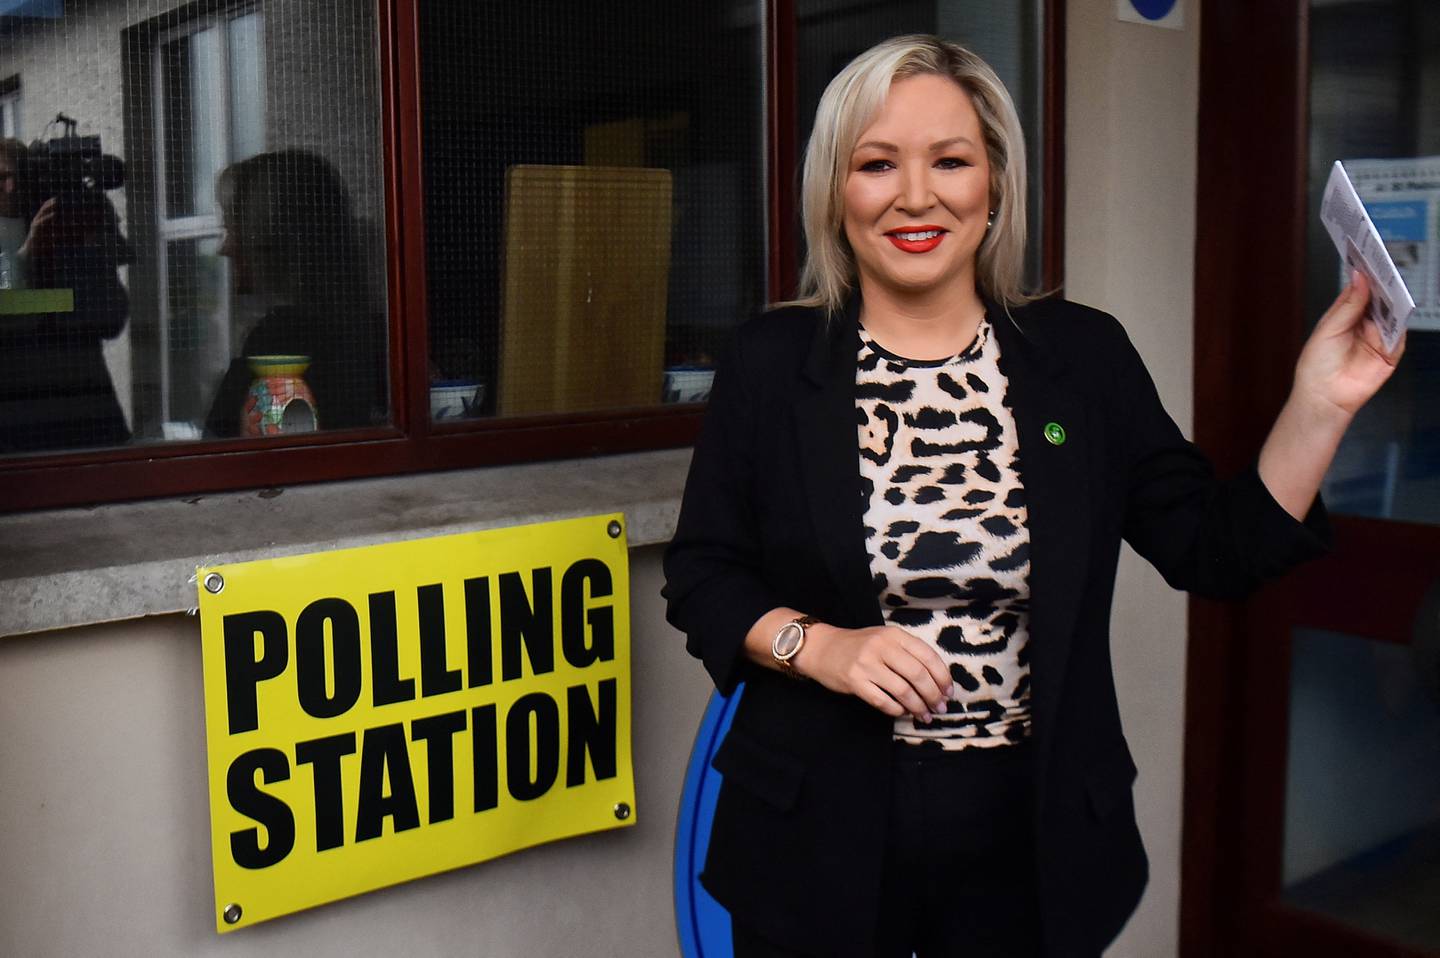 Sinn Fein’s Stormont leader Michelle O’Neill attends to vote on the day of the Northern Ireland Assembly elections, at a polling station in Coalisland, Northern Ireland, on May 5. Reuters